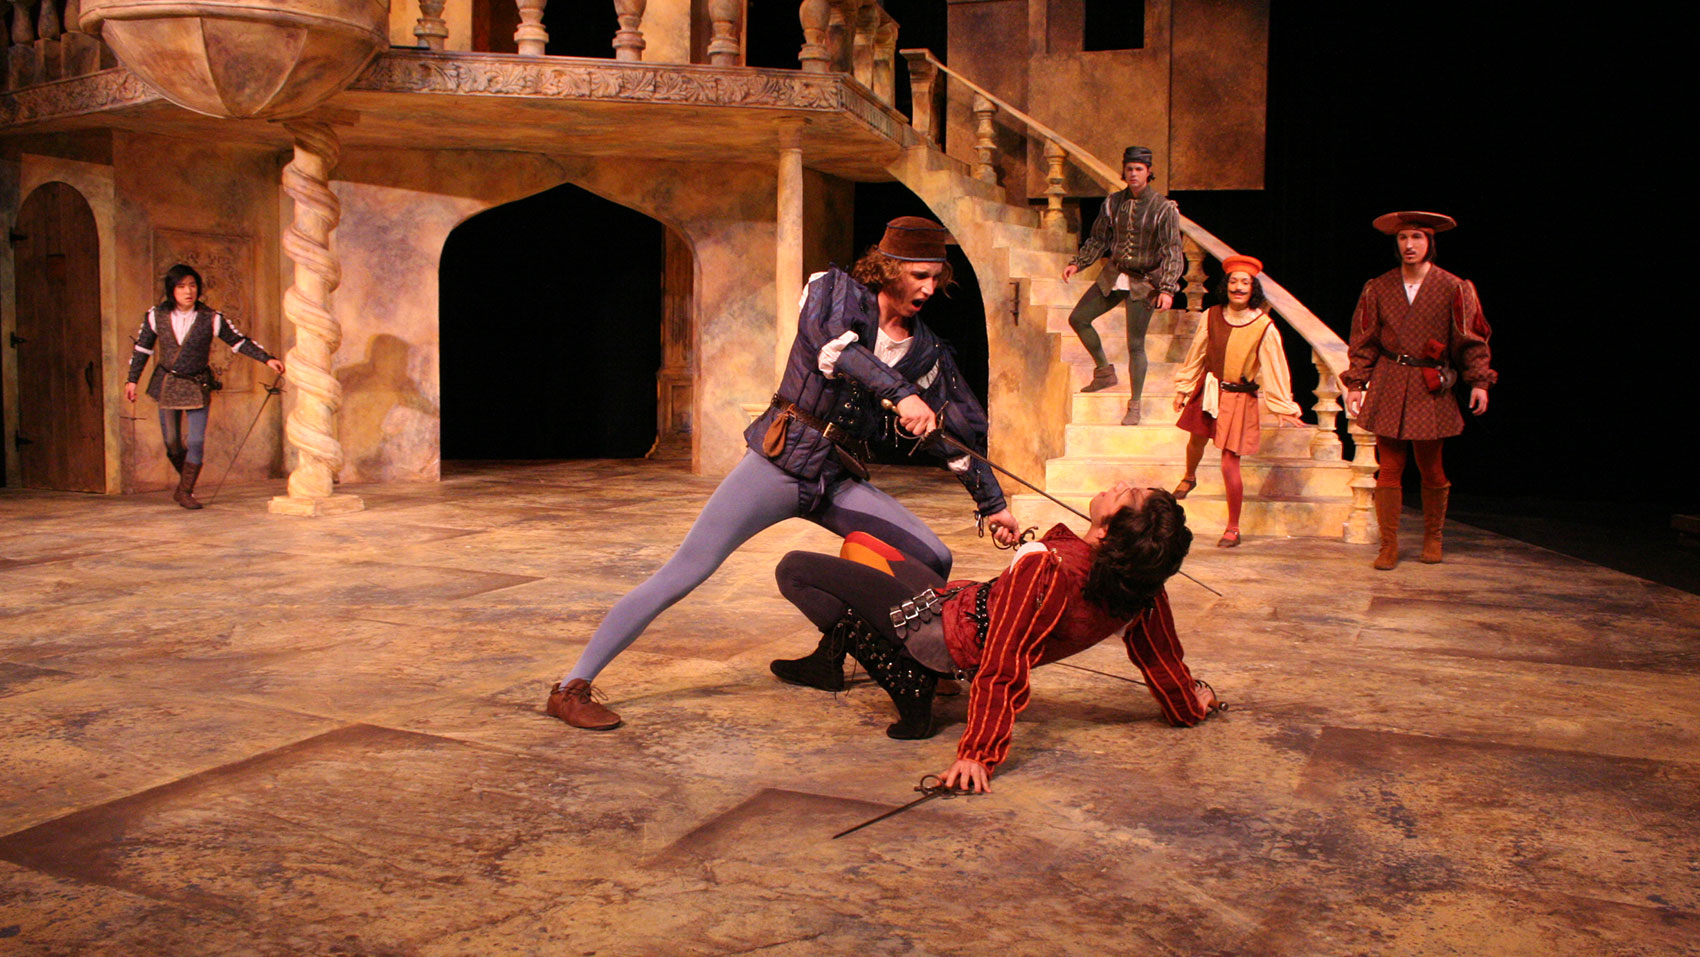 A man stands over a man, who is on the ground, with a sword pressed against his throat. Fpur characters watch from further back on the stage.